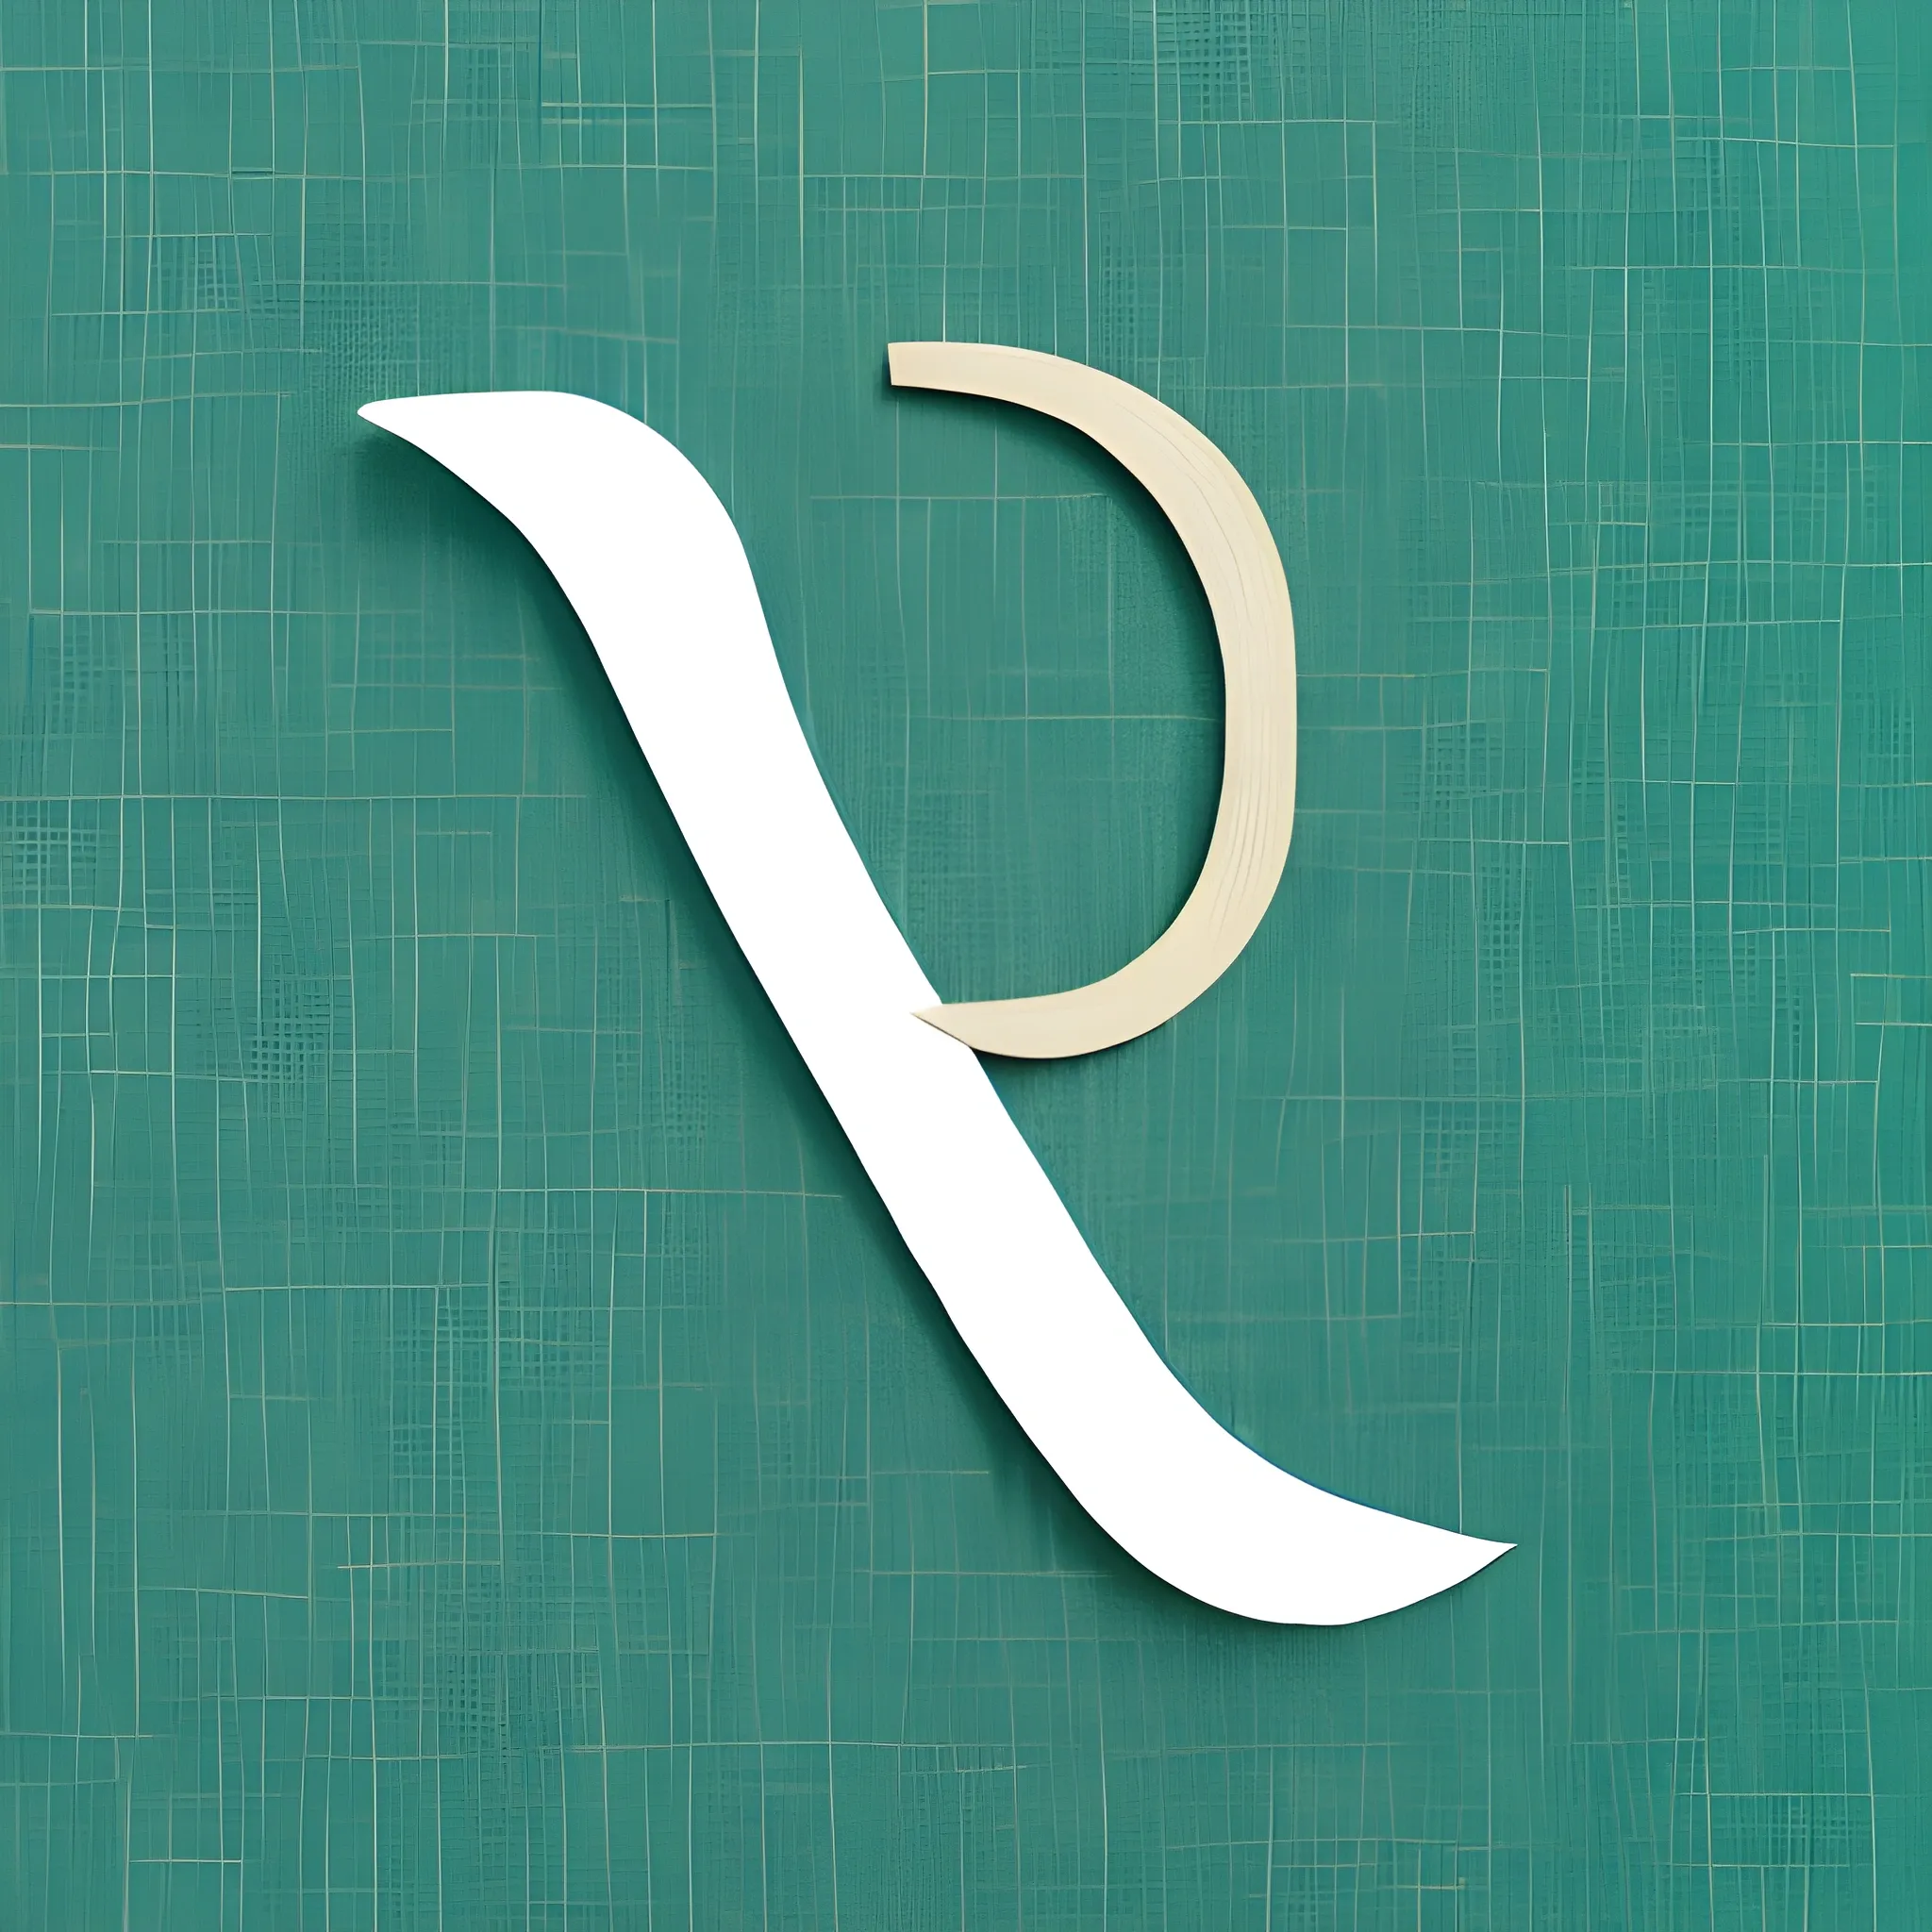 A letter T designed using fabric materials
